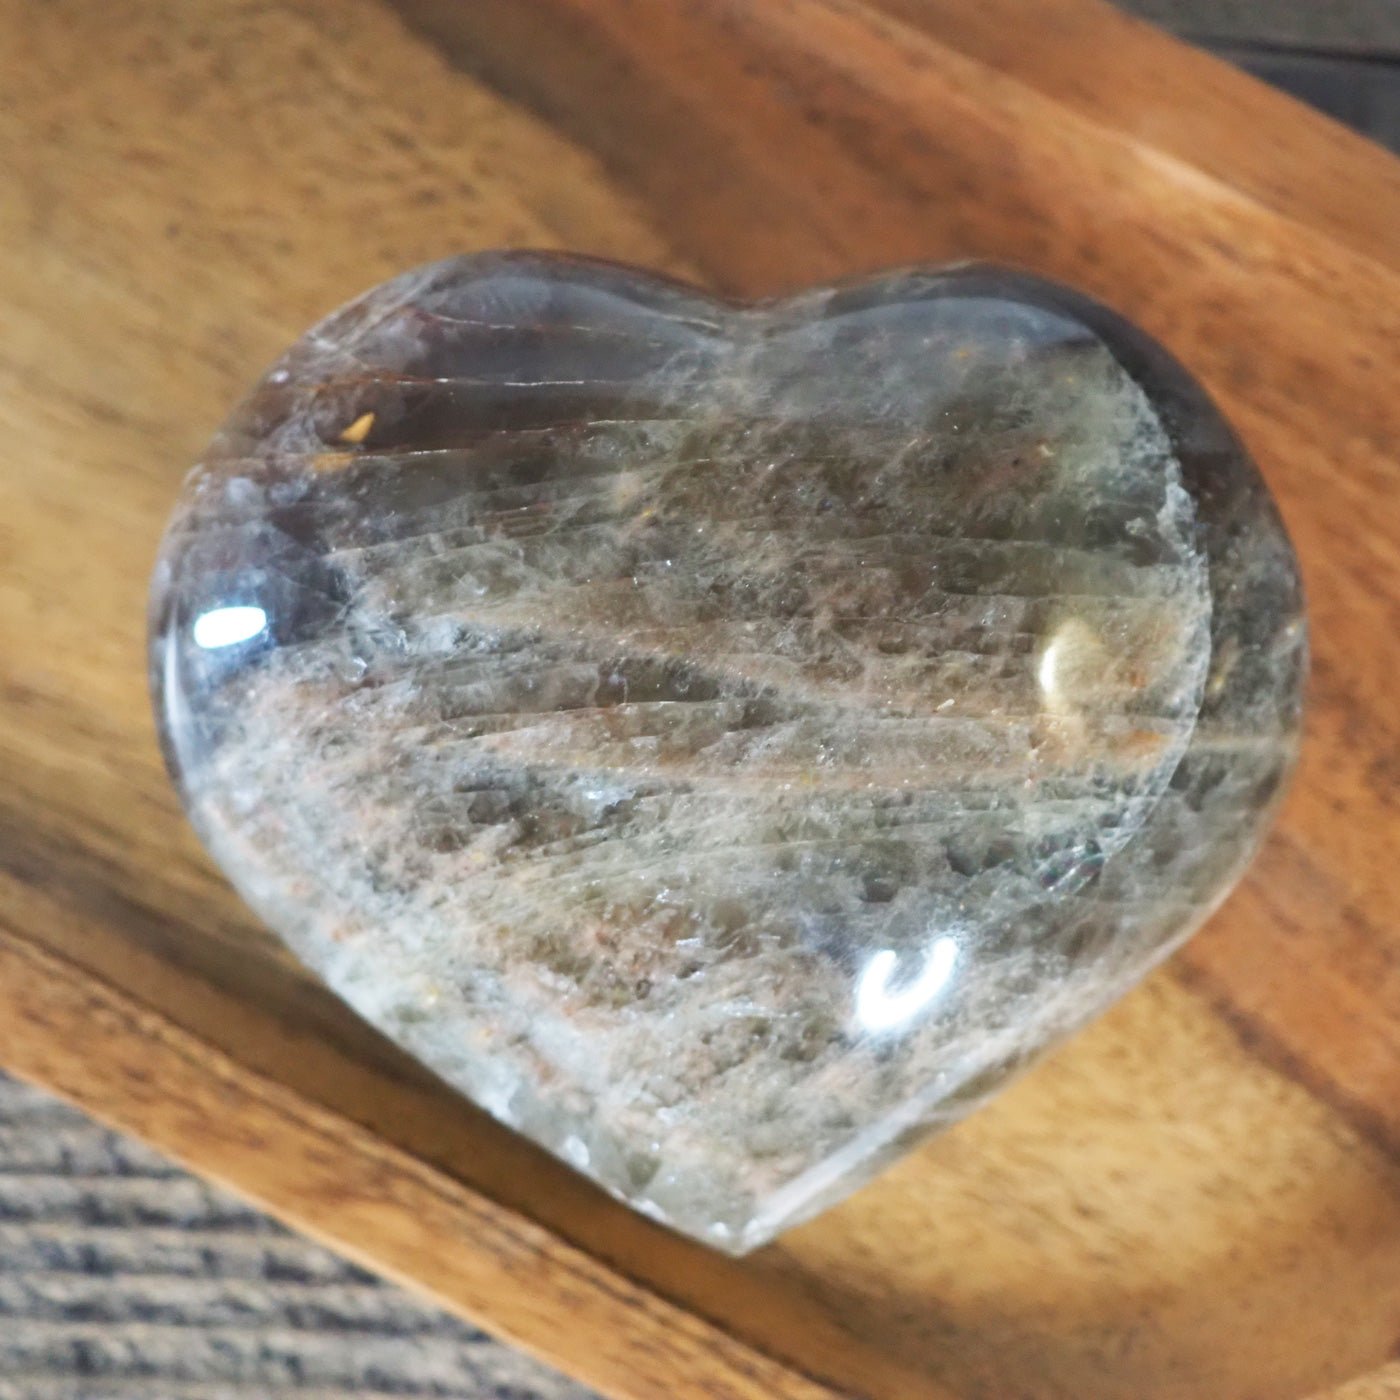 Black Moonstone heart carving from above